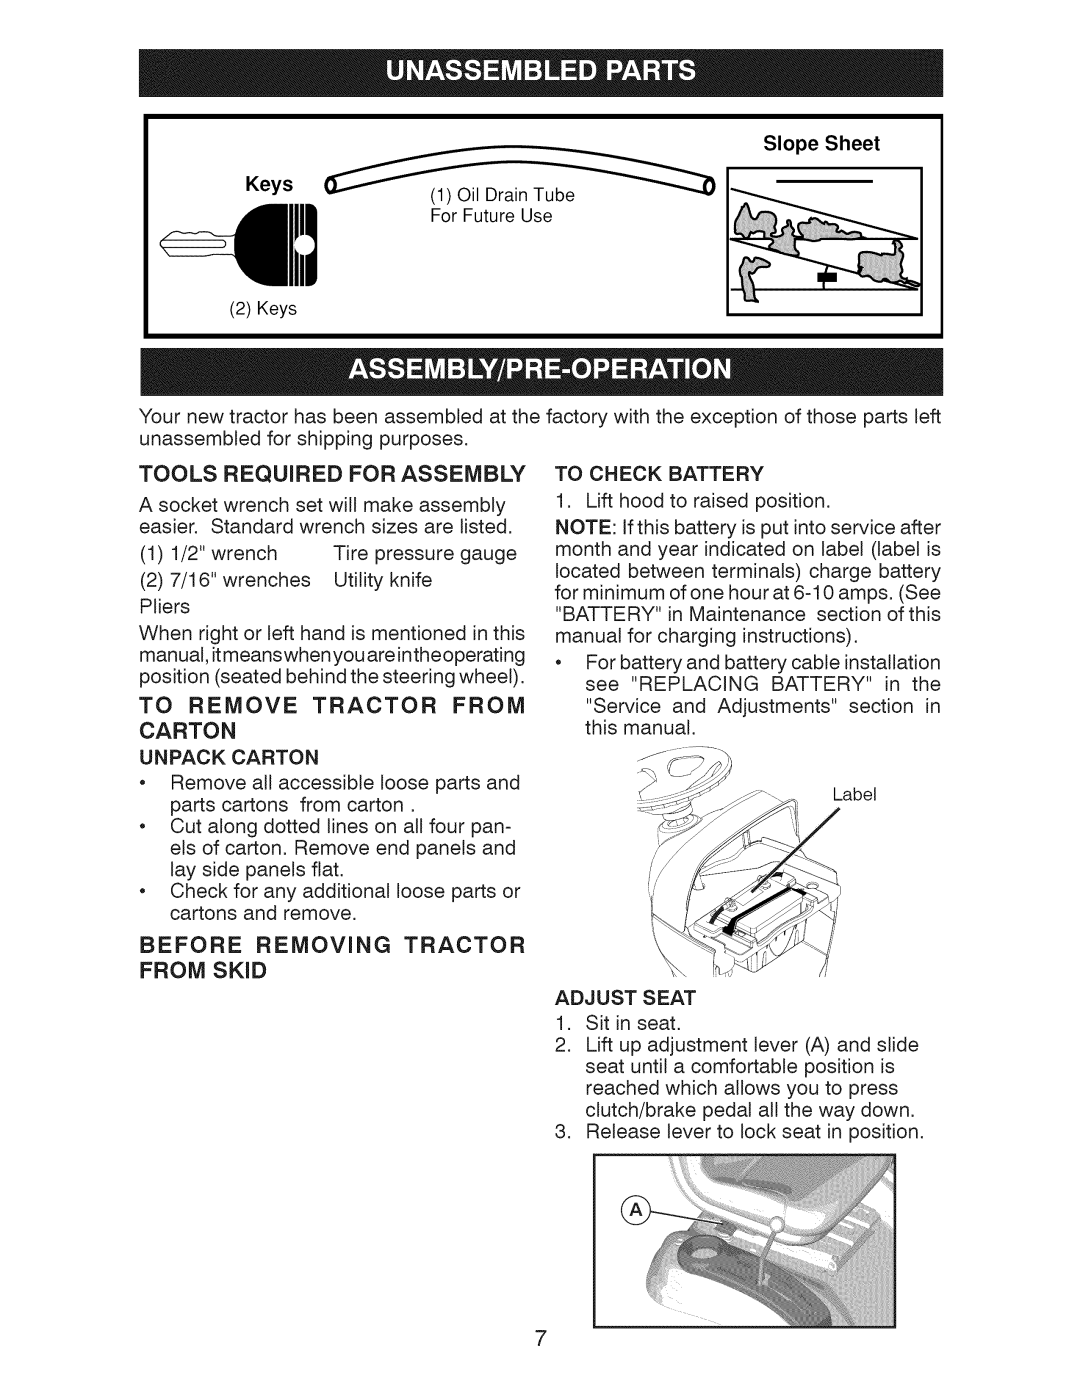 Craftsman 917.289253, 917.289250, 917.289251 owner manual From Skid, Tools Required For Assembly, Before Removing Tractor 